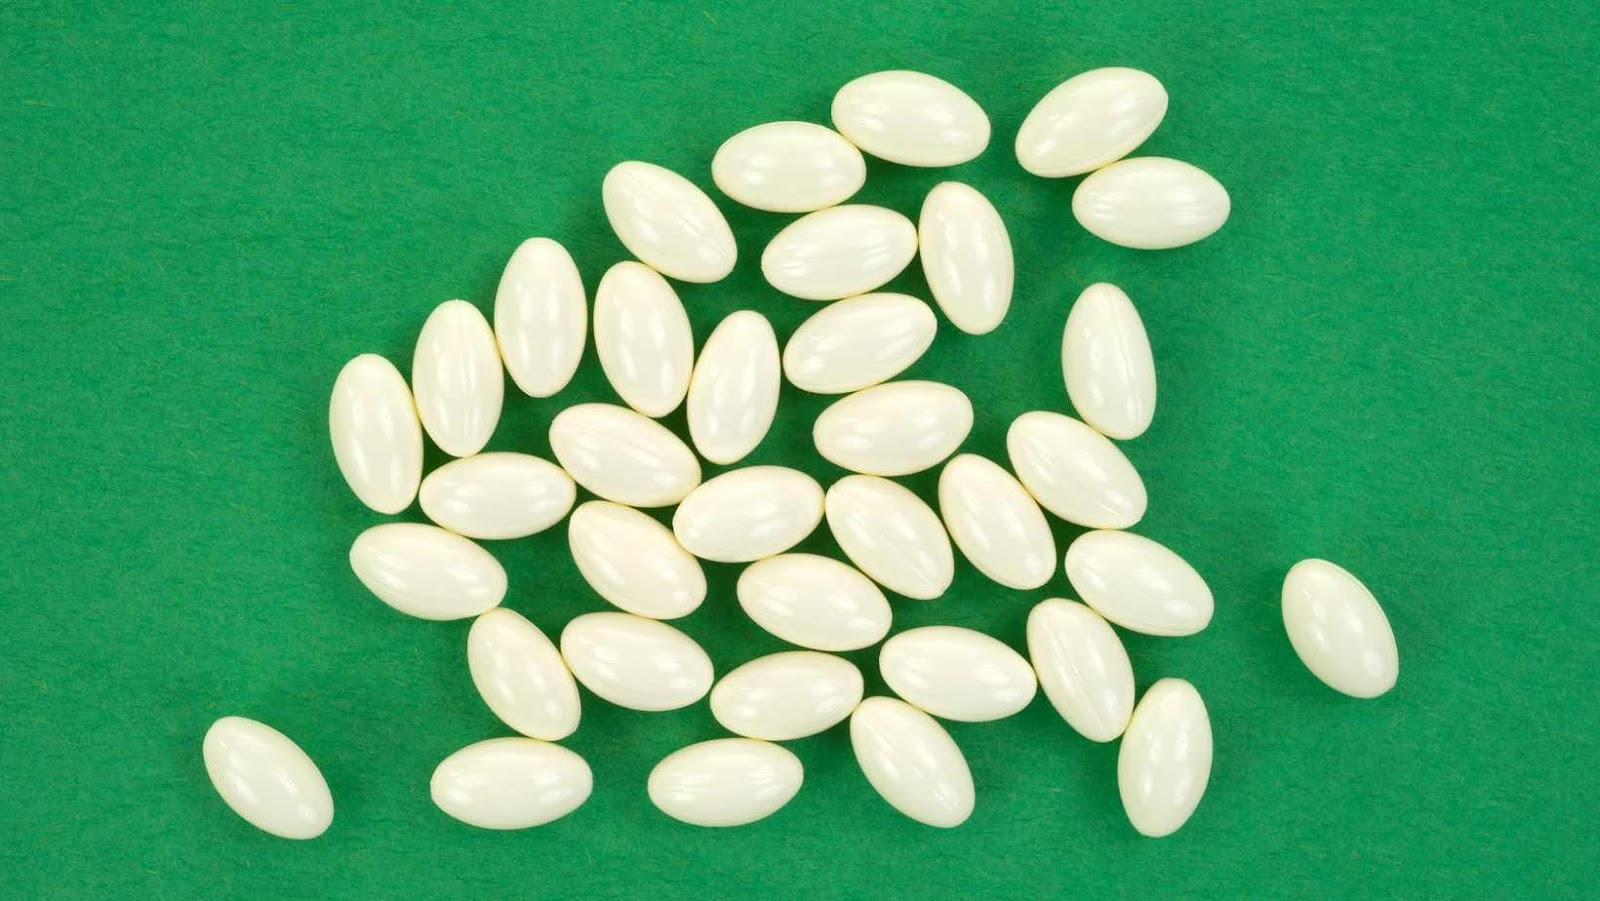 10,000 MCG of Biotin – is it Too Much?